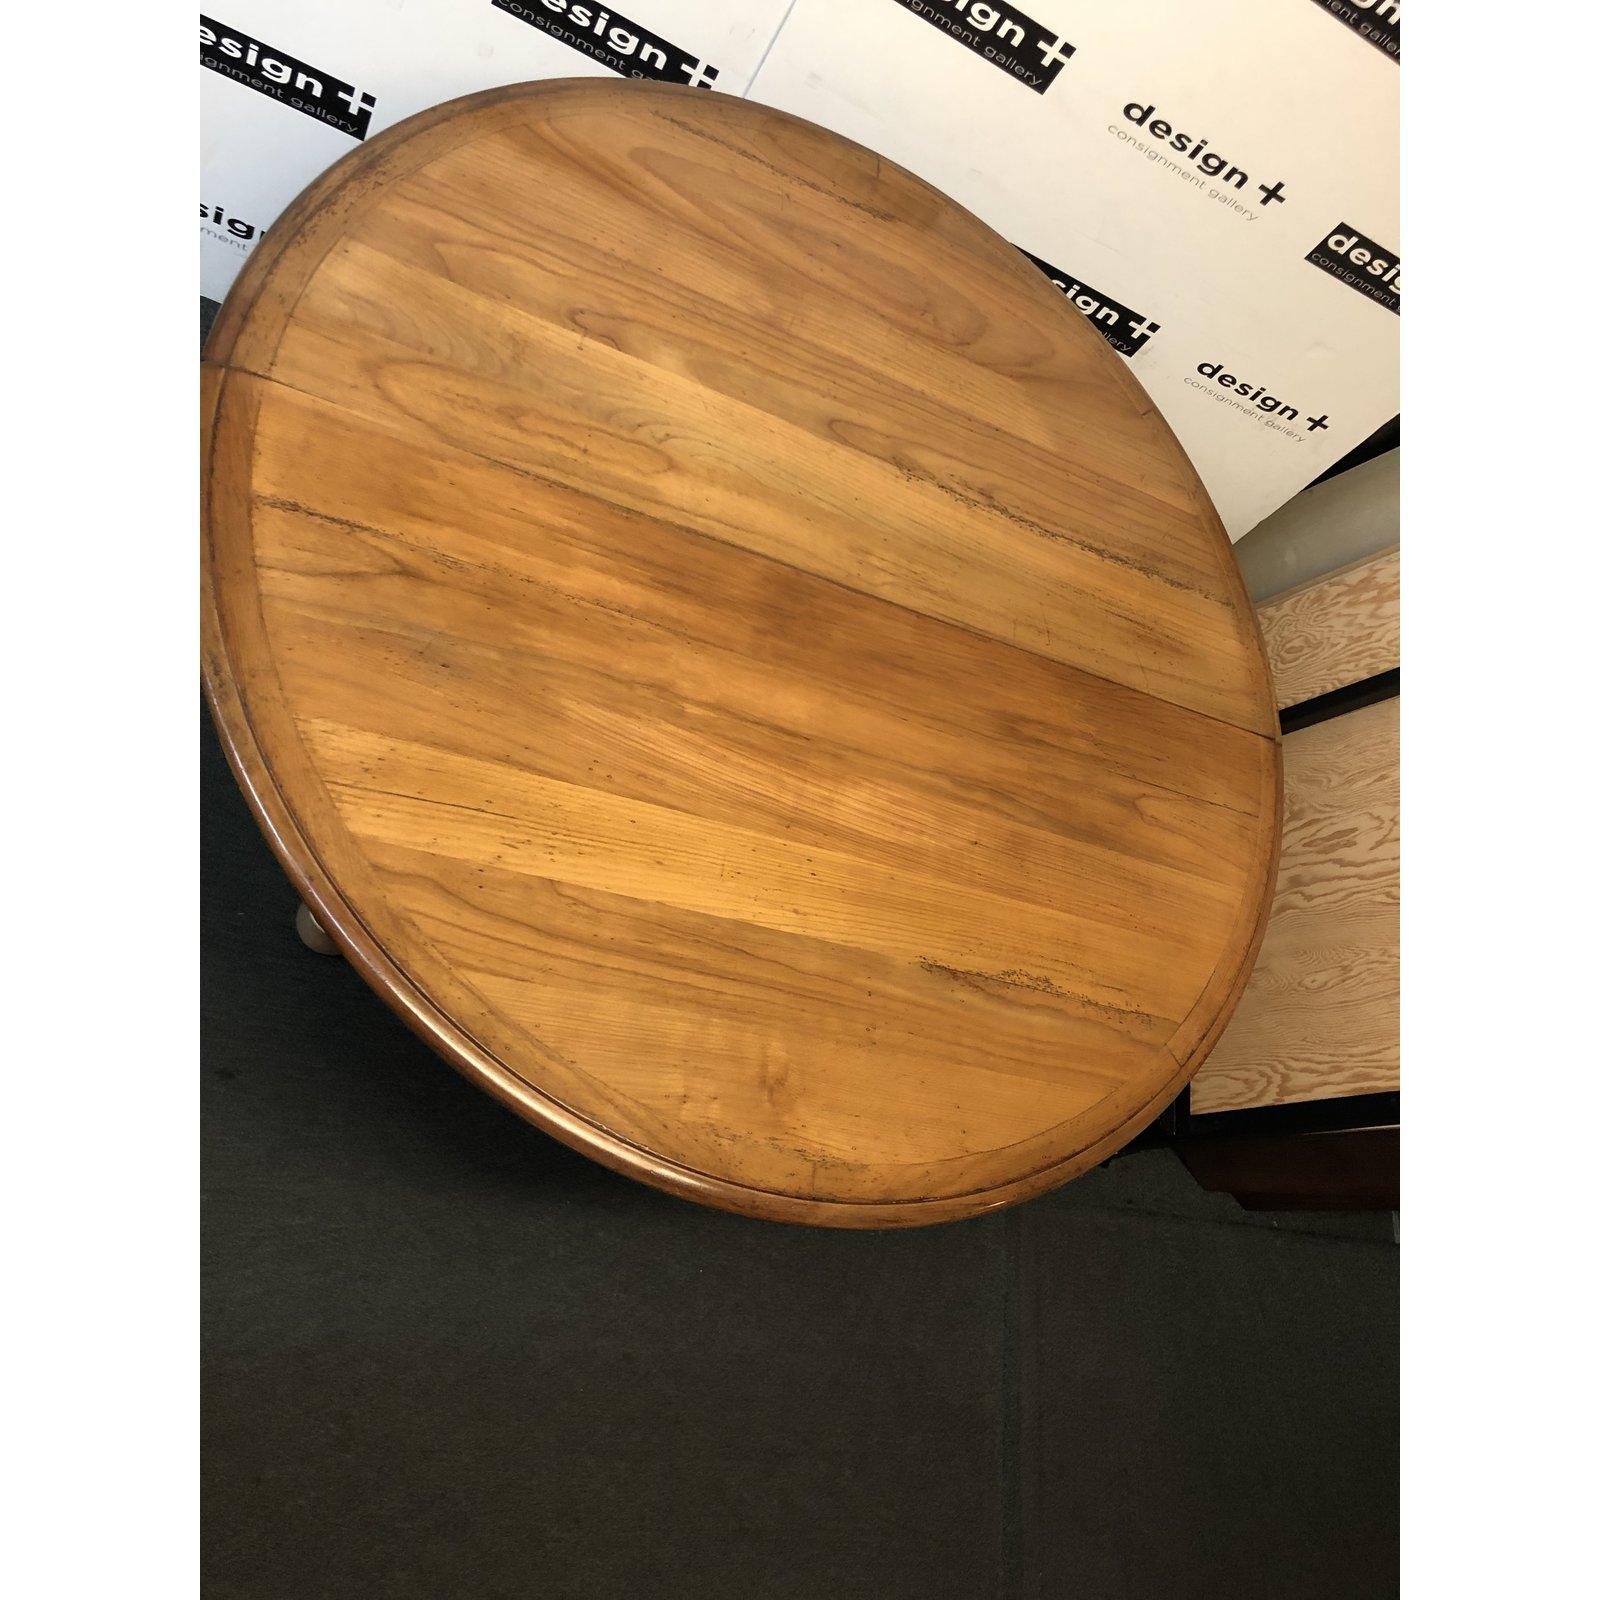 Other Contemporary Round Pedestal Dining Table For Sale